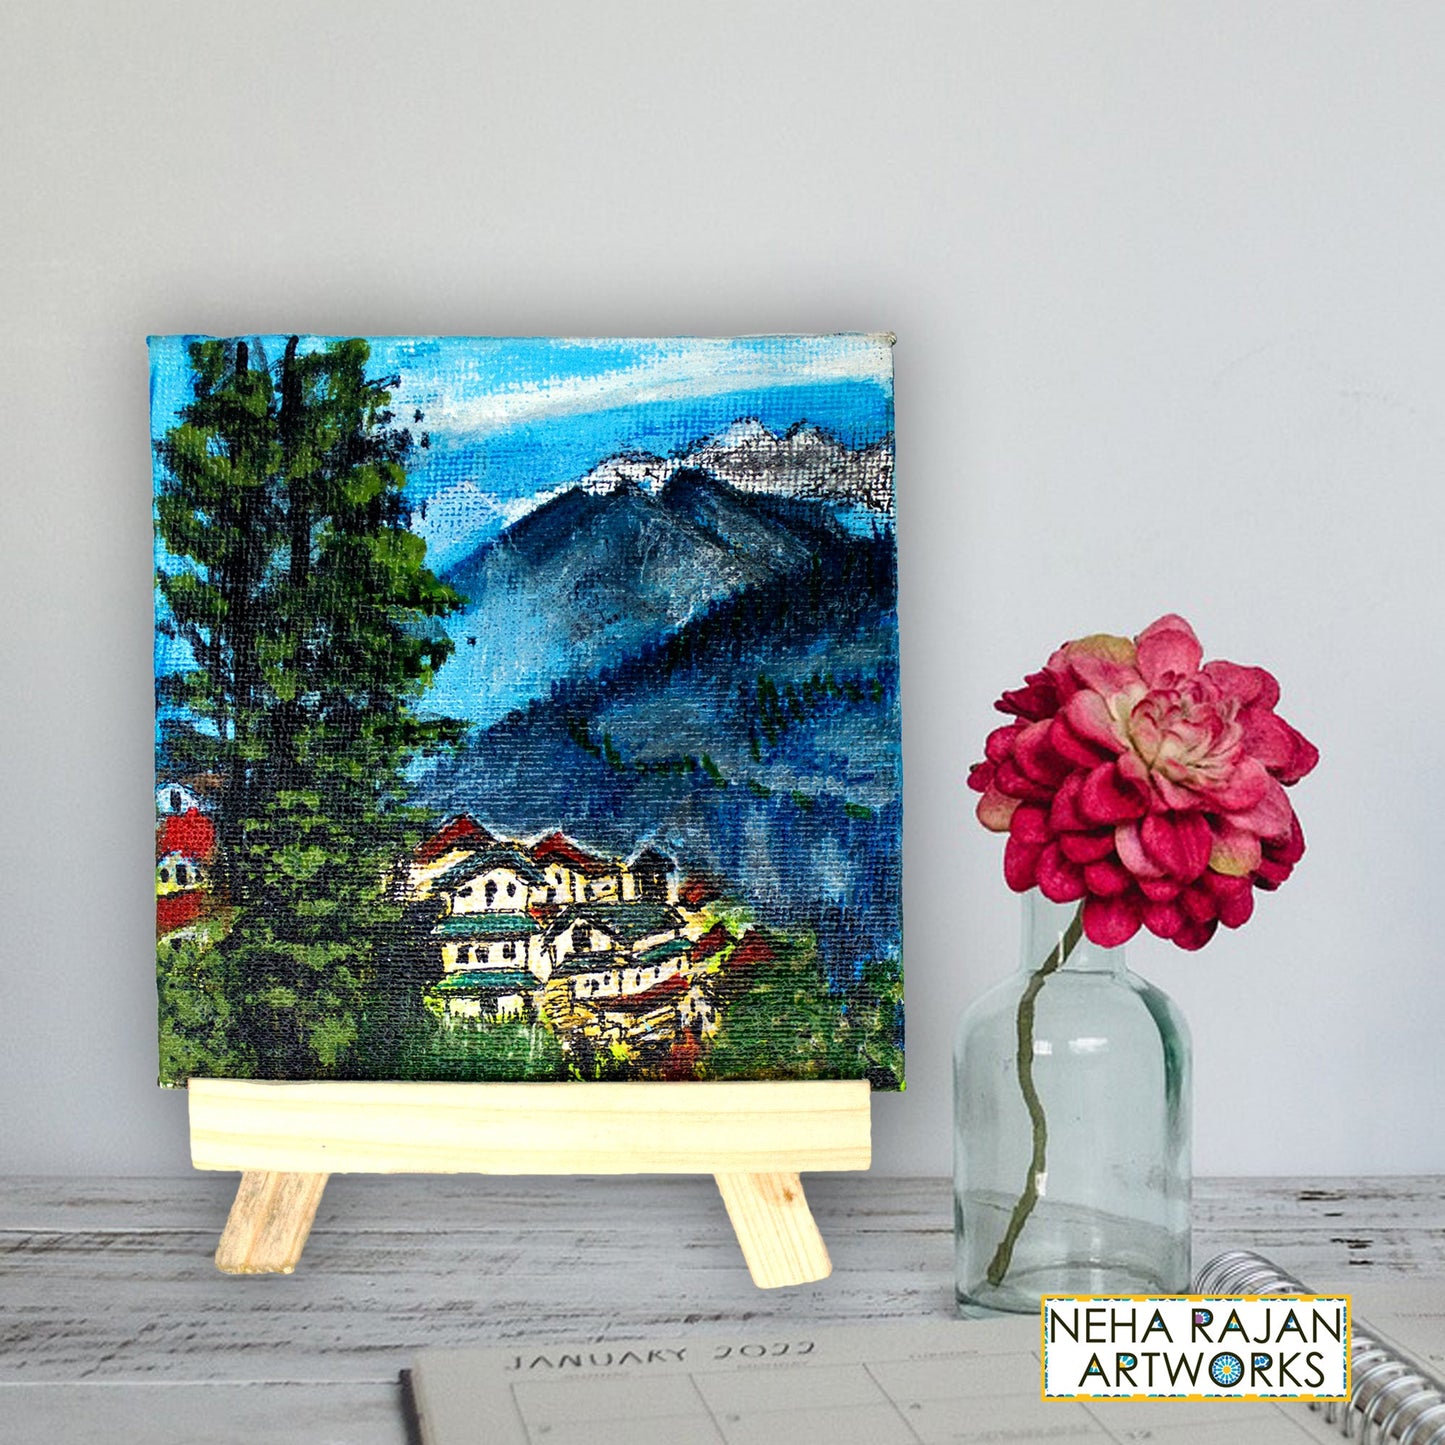 Neha Rajan Artworks Original Handmade Scenery Mountain Painting Hand Painted On Canvas Frame 4*4 With Easel